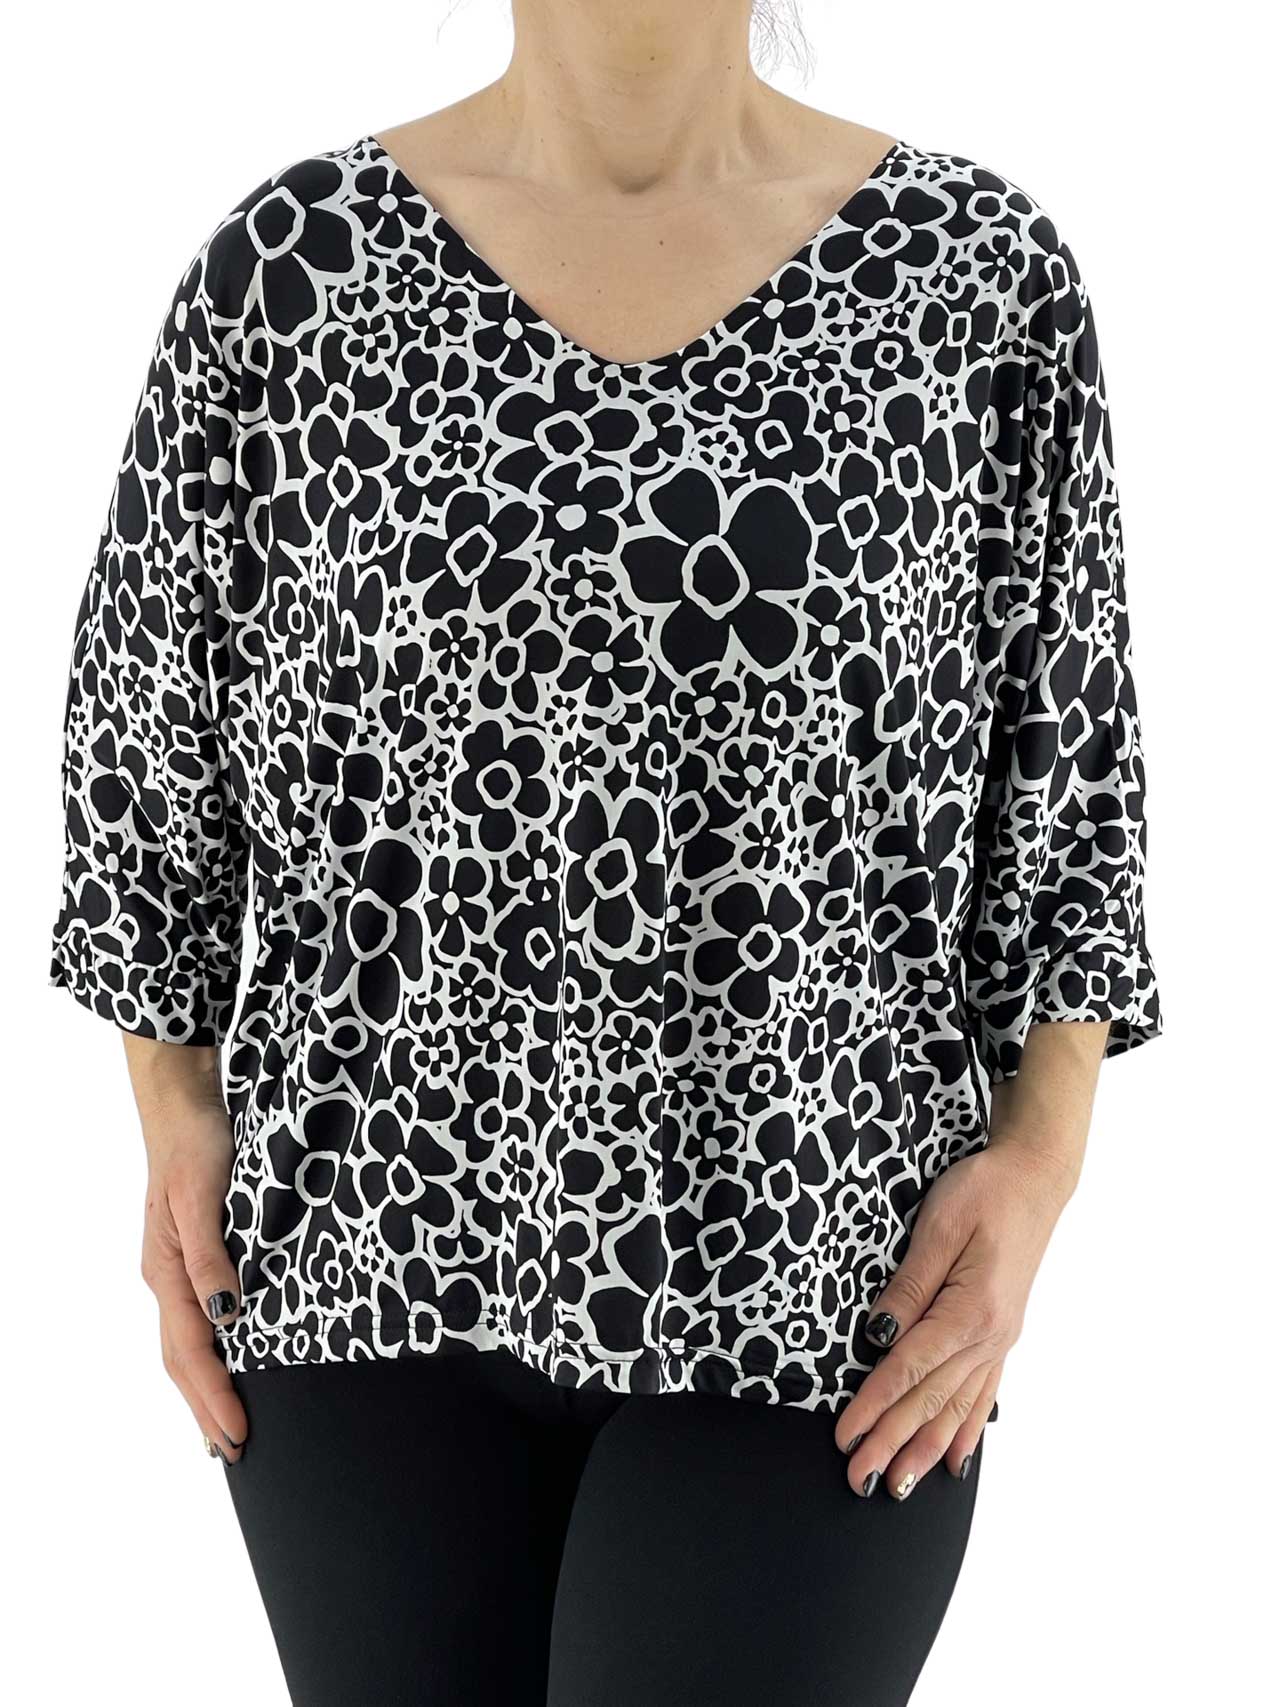 Blouse women's black and white code 517896